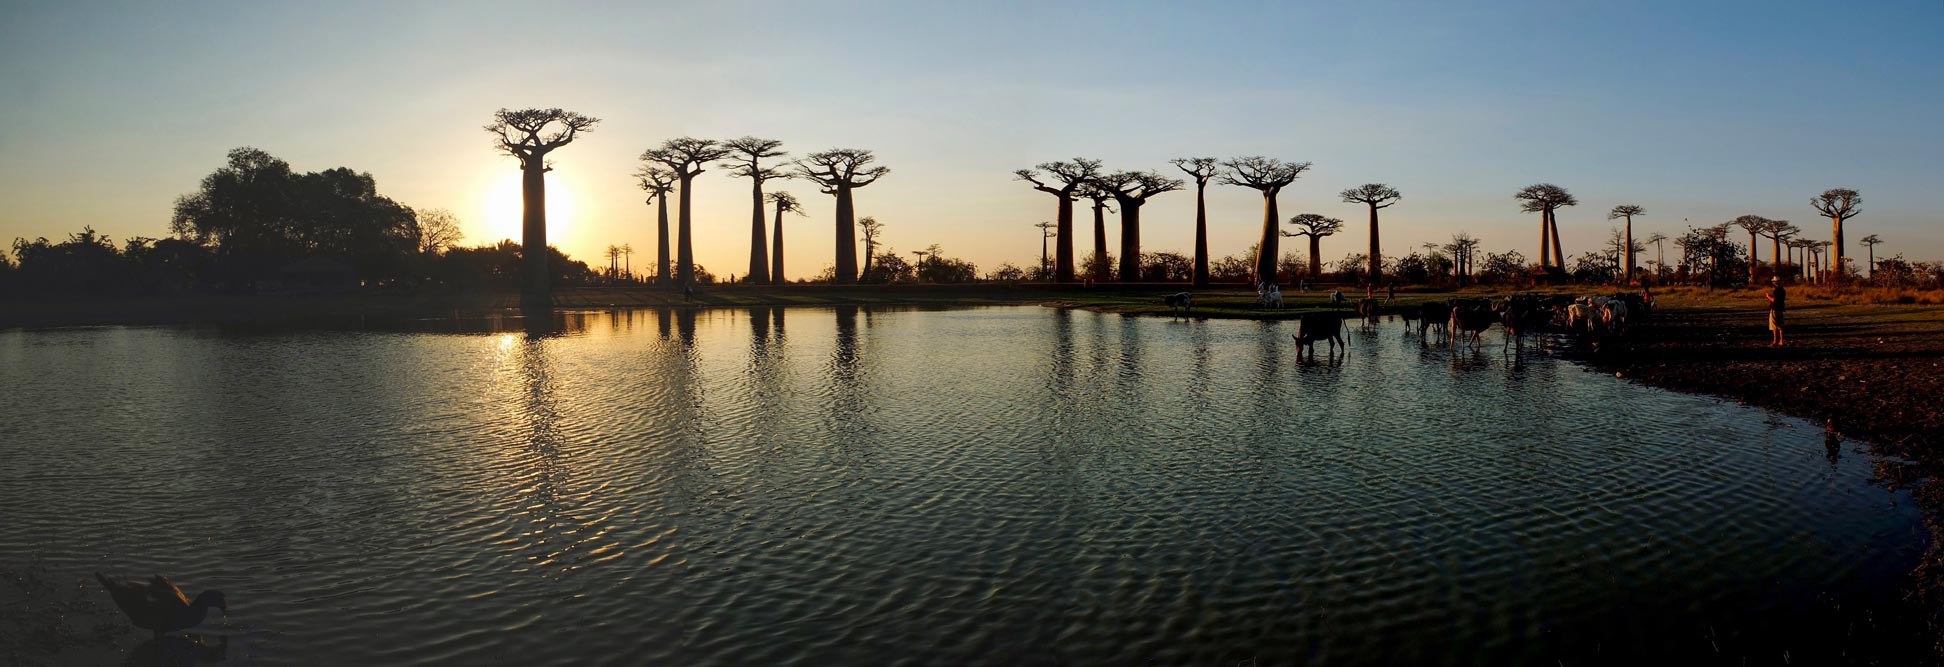 Sunset on the Avenue of the Baobabs